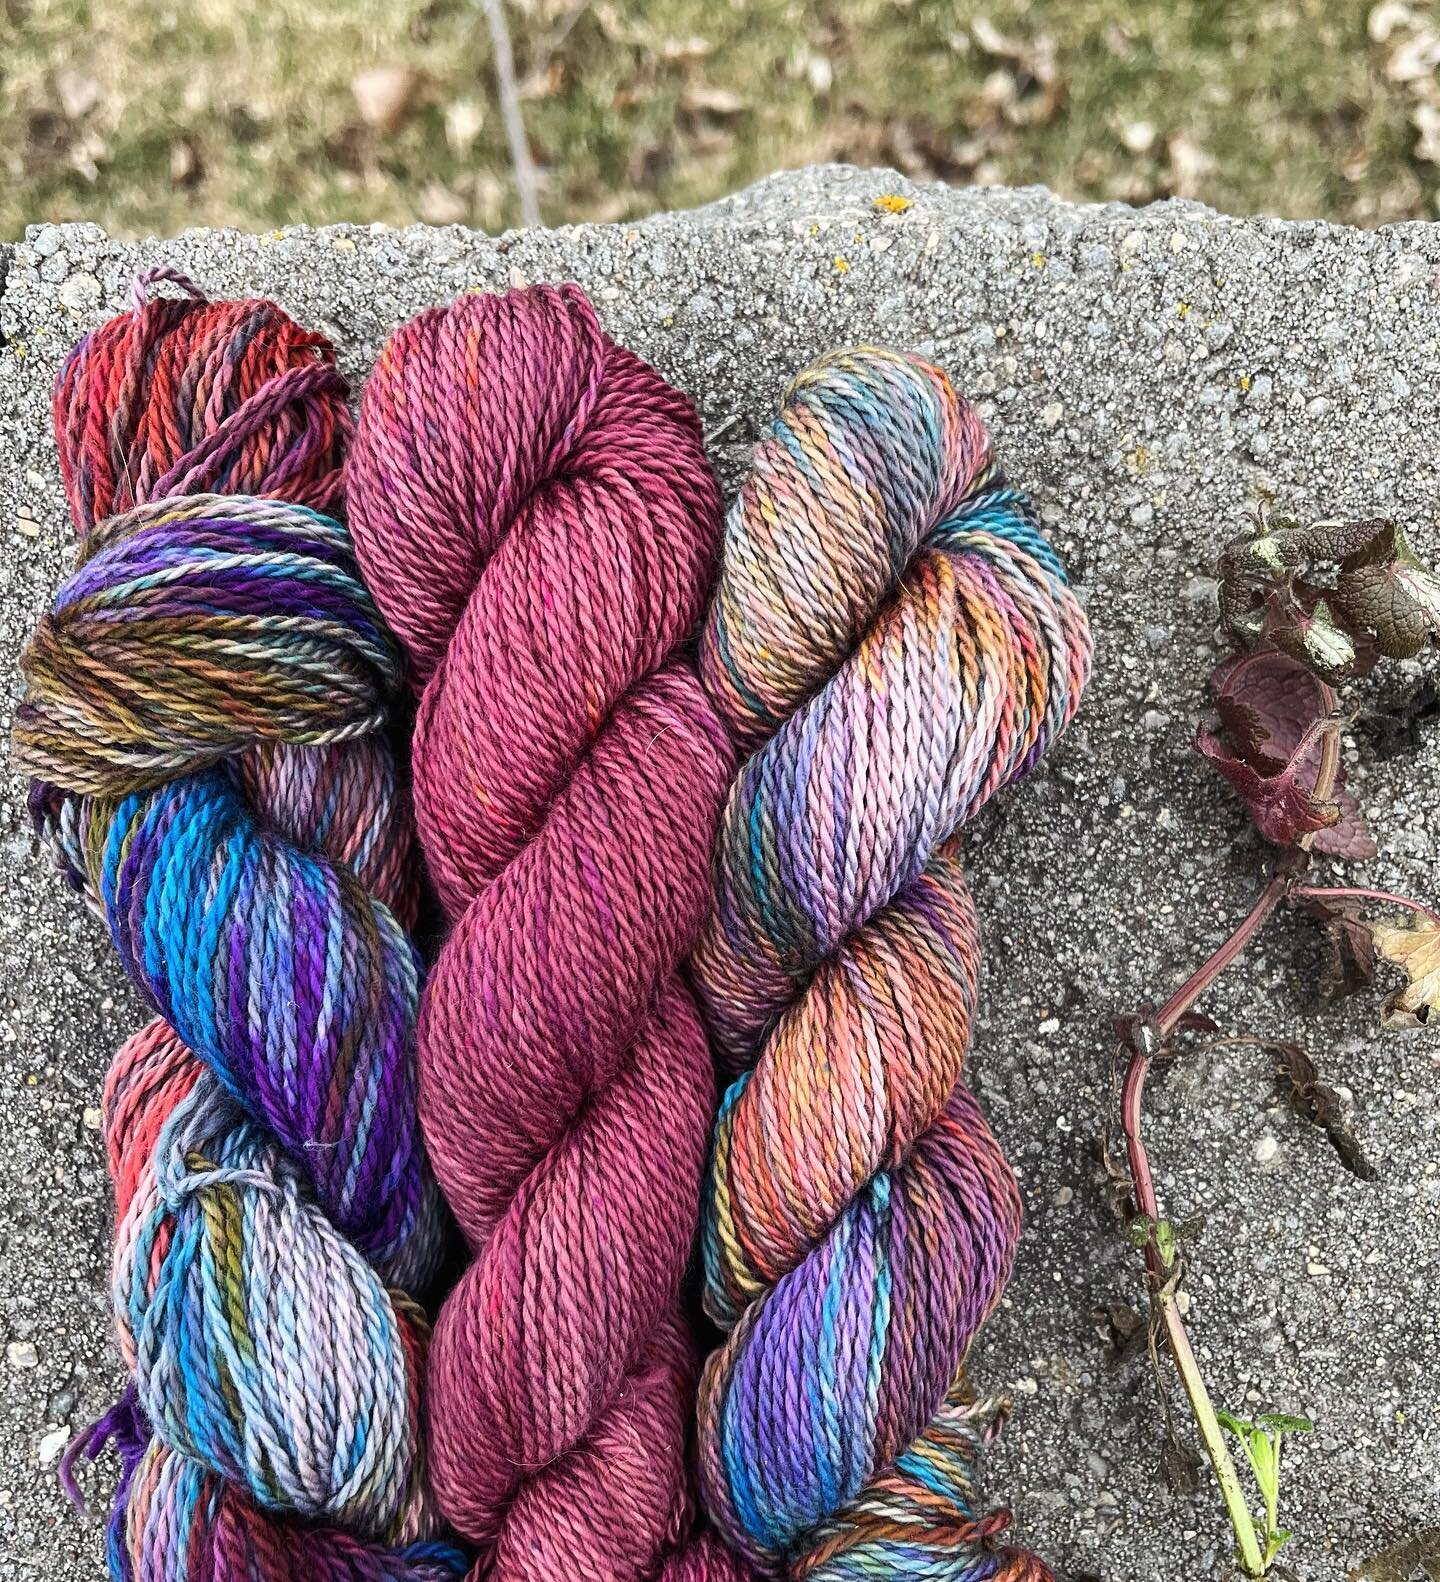 Which combo do you like? I&rsquo;m going to attempt to knit one sock while Eric drives to Colorado so we can show off this great 100% organic cotton sock yarn. I&rsquo;m looking for recommendations.
.
.
.
.

🧦 🧶 🧦 🧶 
.
.
.
.
.
.
.
.
.
.
.
#reywaf